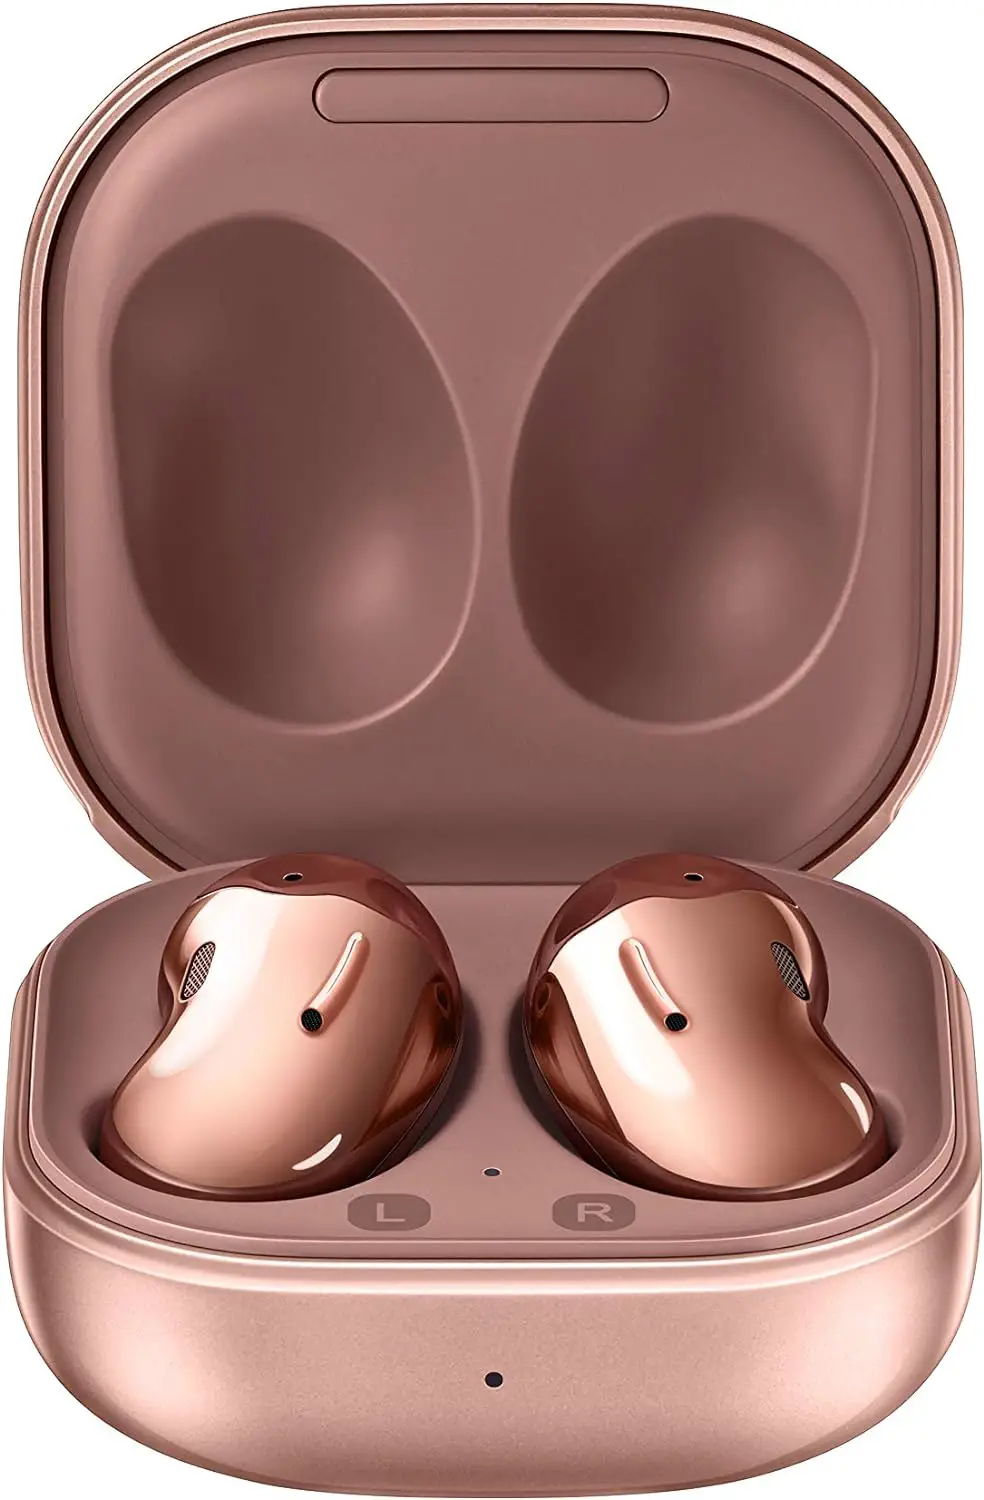 SAMSUNG Galaxy Buds Live True Wireless Earbuds US Version Active Noise Cancelling Wireless Charging Case Included Mystic Bronze